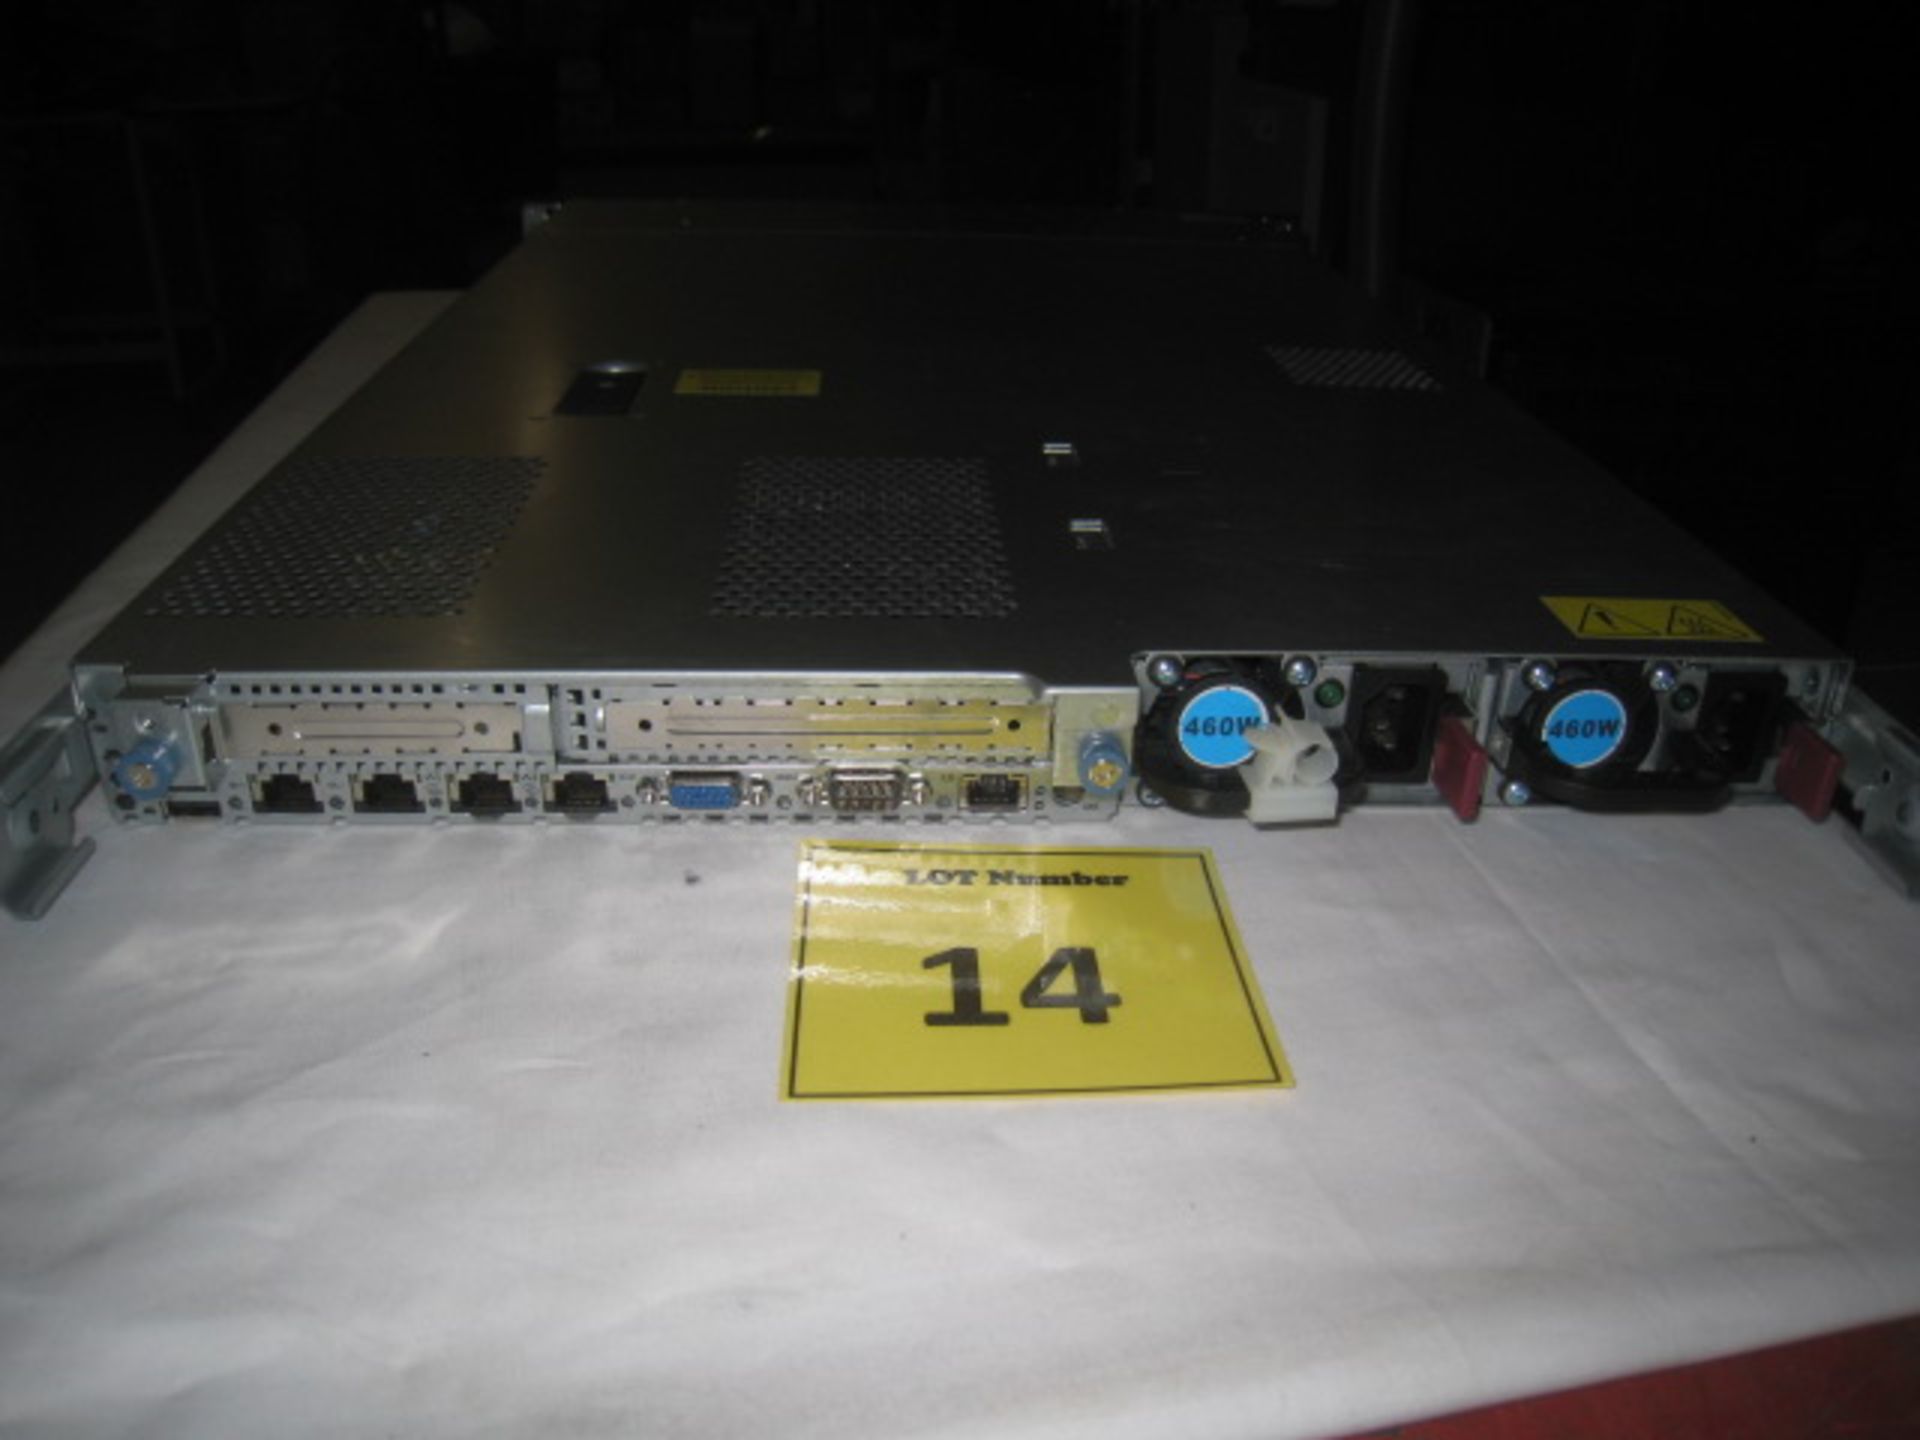 HP DL360 G7 (CASE BADGED G6)1U RACKMOUNT FILESERVER. 2 X QUAD CORE 2.53GHZ PROCESSORS (E5630), 8GB - Image 2 of 2